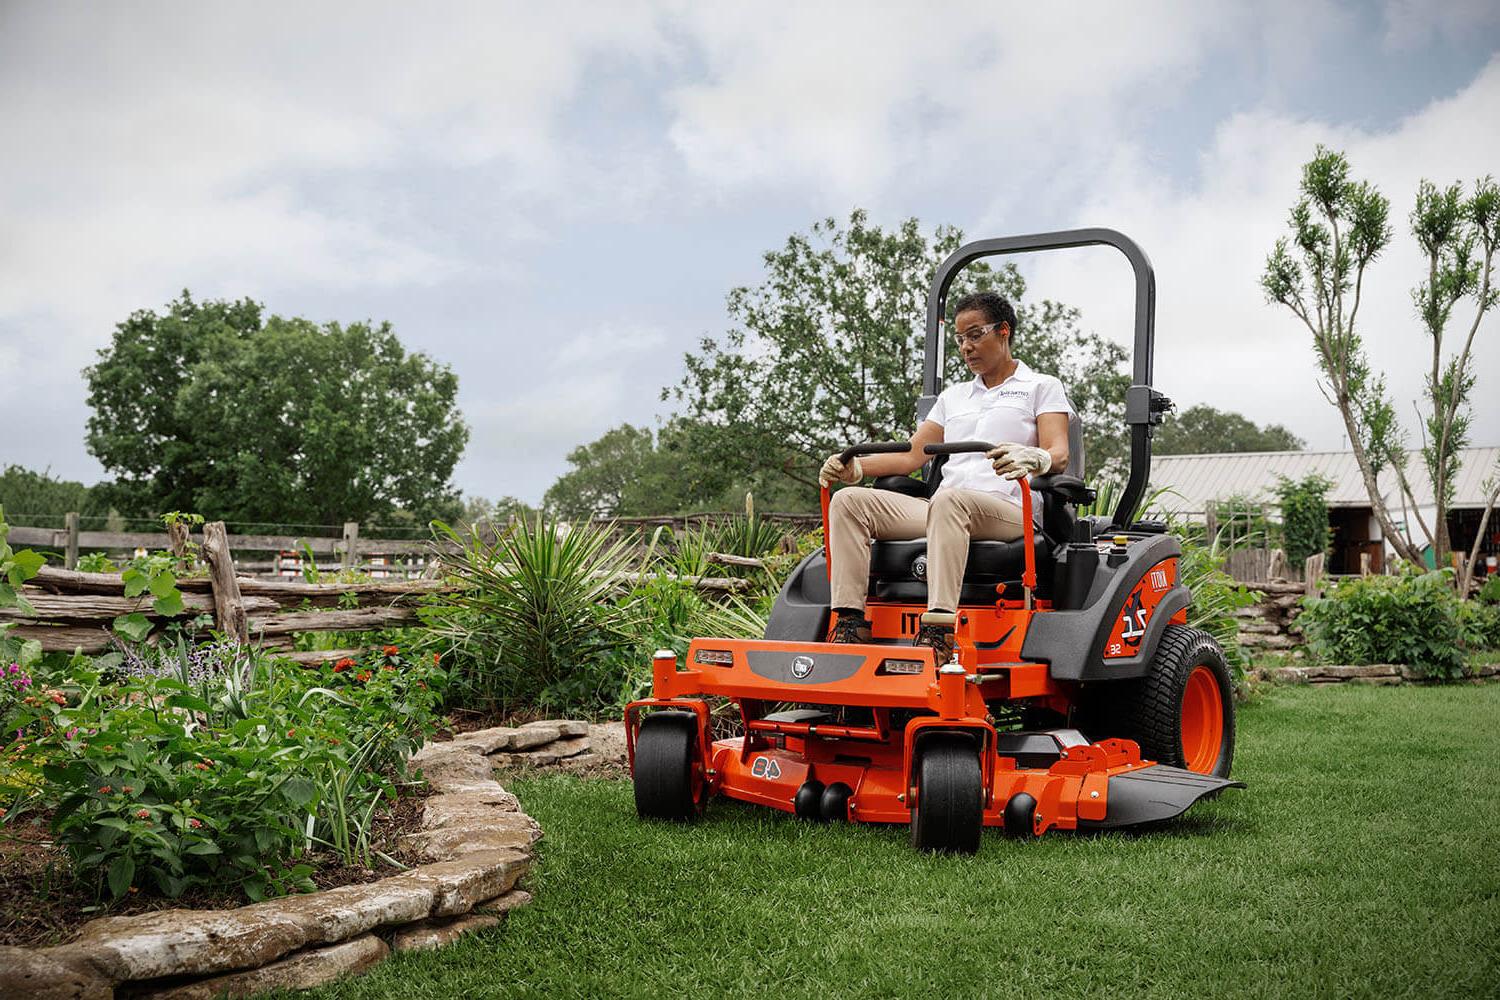 grounds and landscaping maintenance with a Kioti compact utility tractor